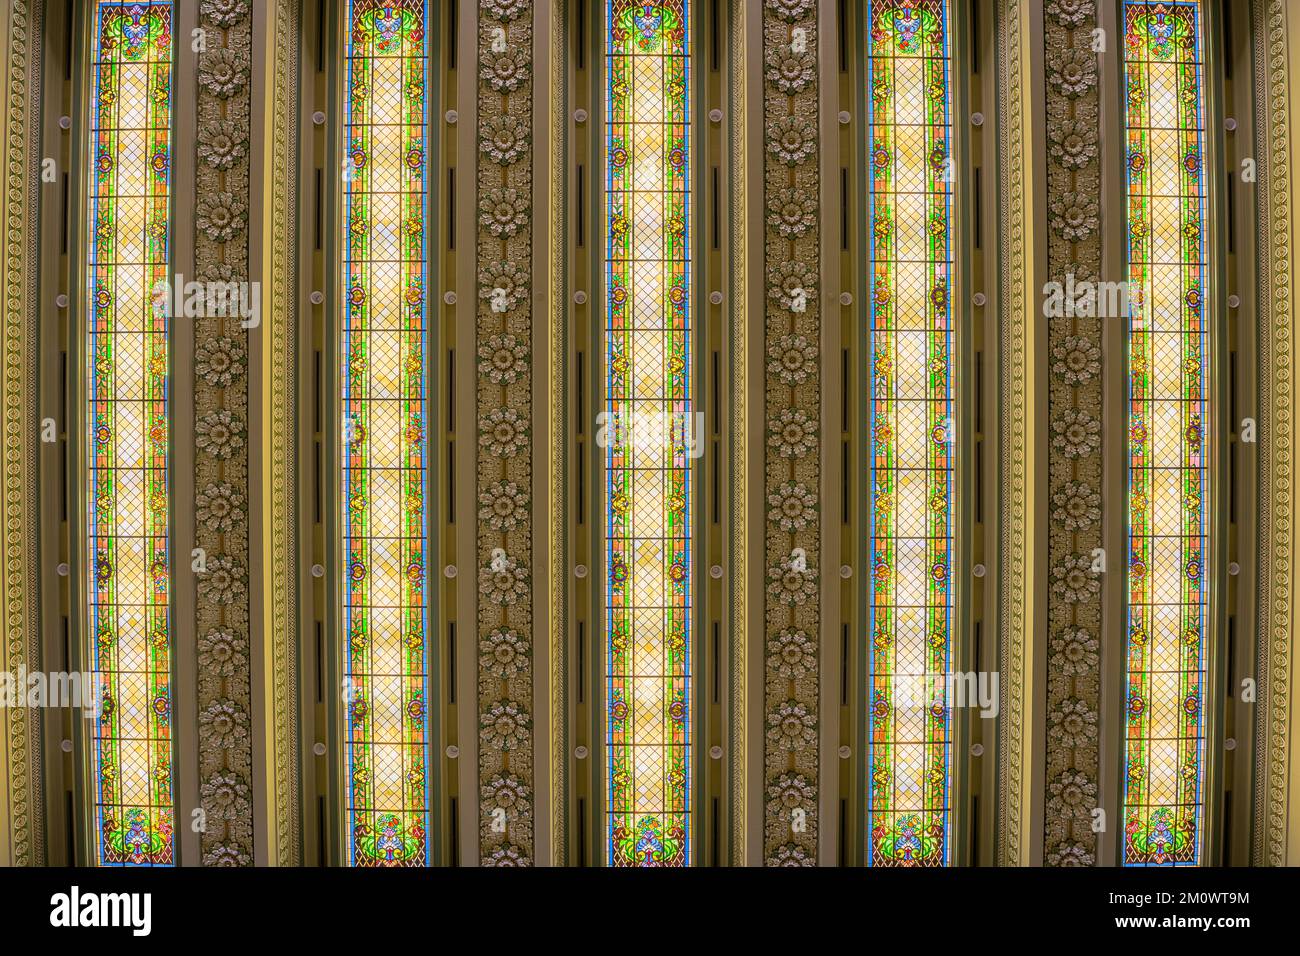 Stained glass ceiling of the House of Representatives chamber of the Oklahoma State Capitol building in Oklahoma City, Oklahoma Stock Photo